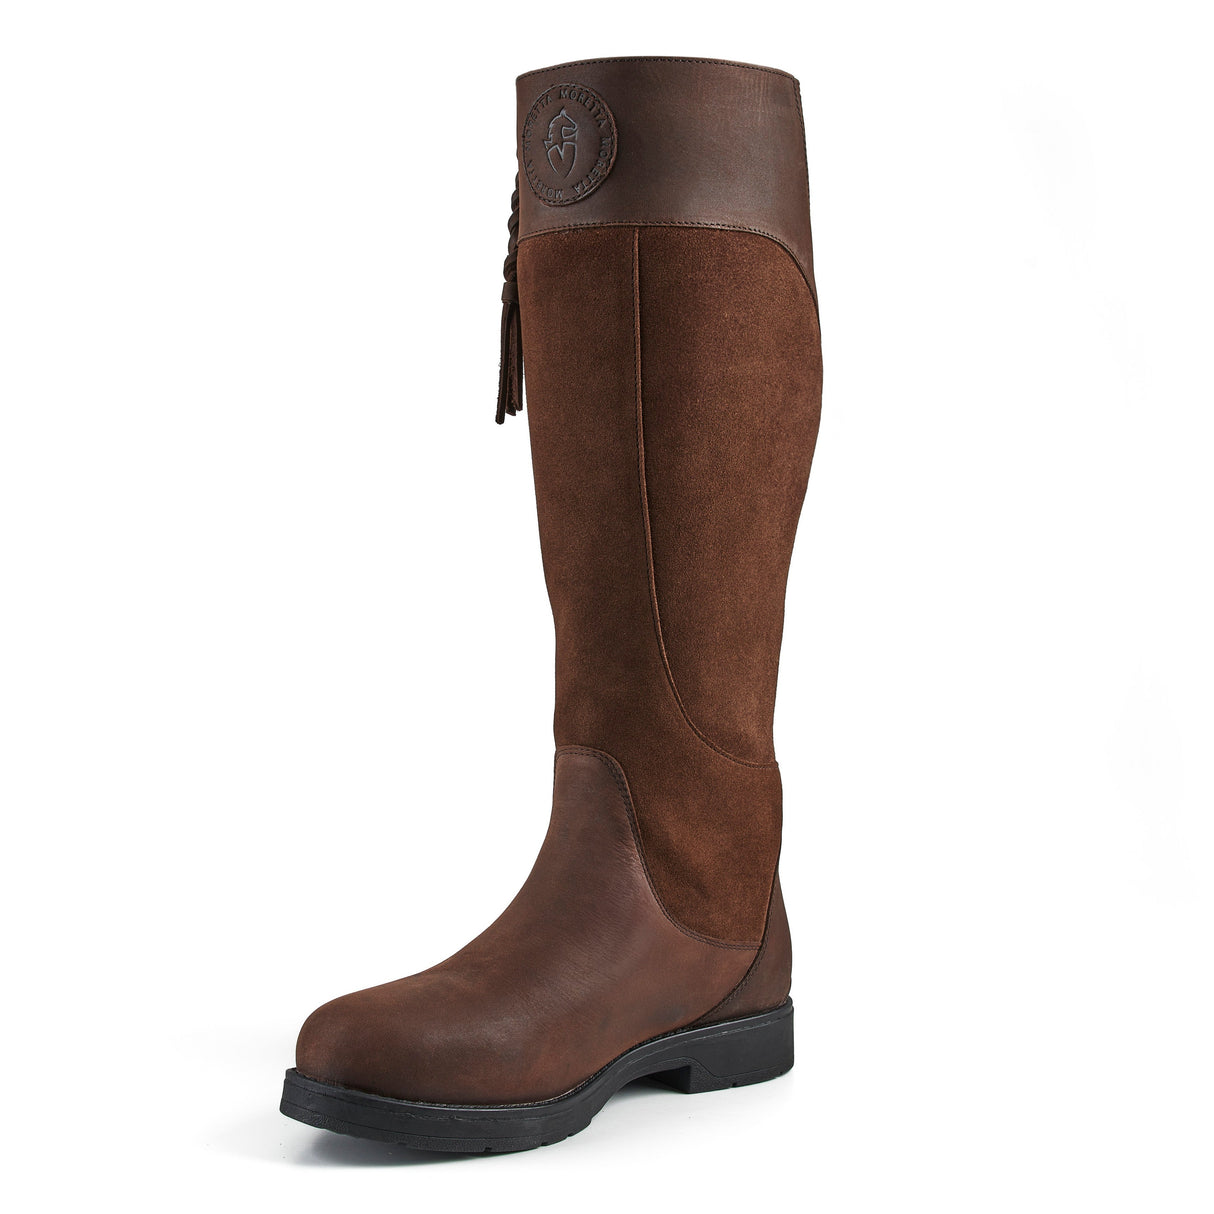 Shires Moretta Varallo Country Boots